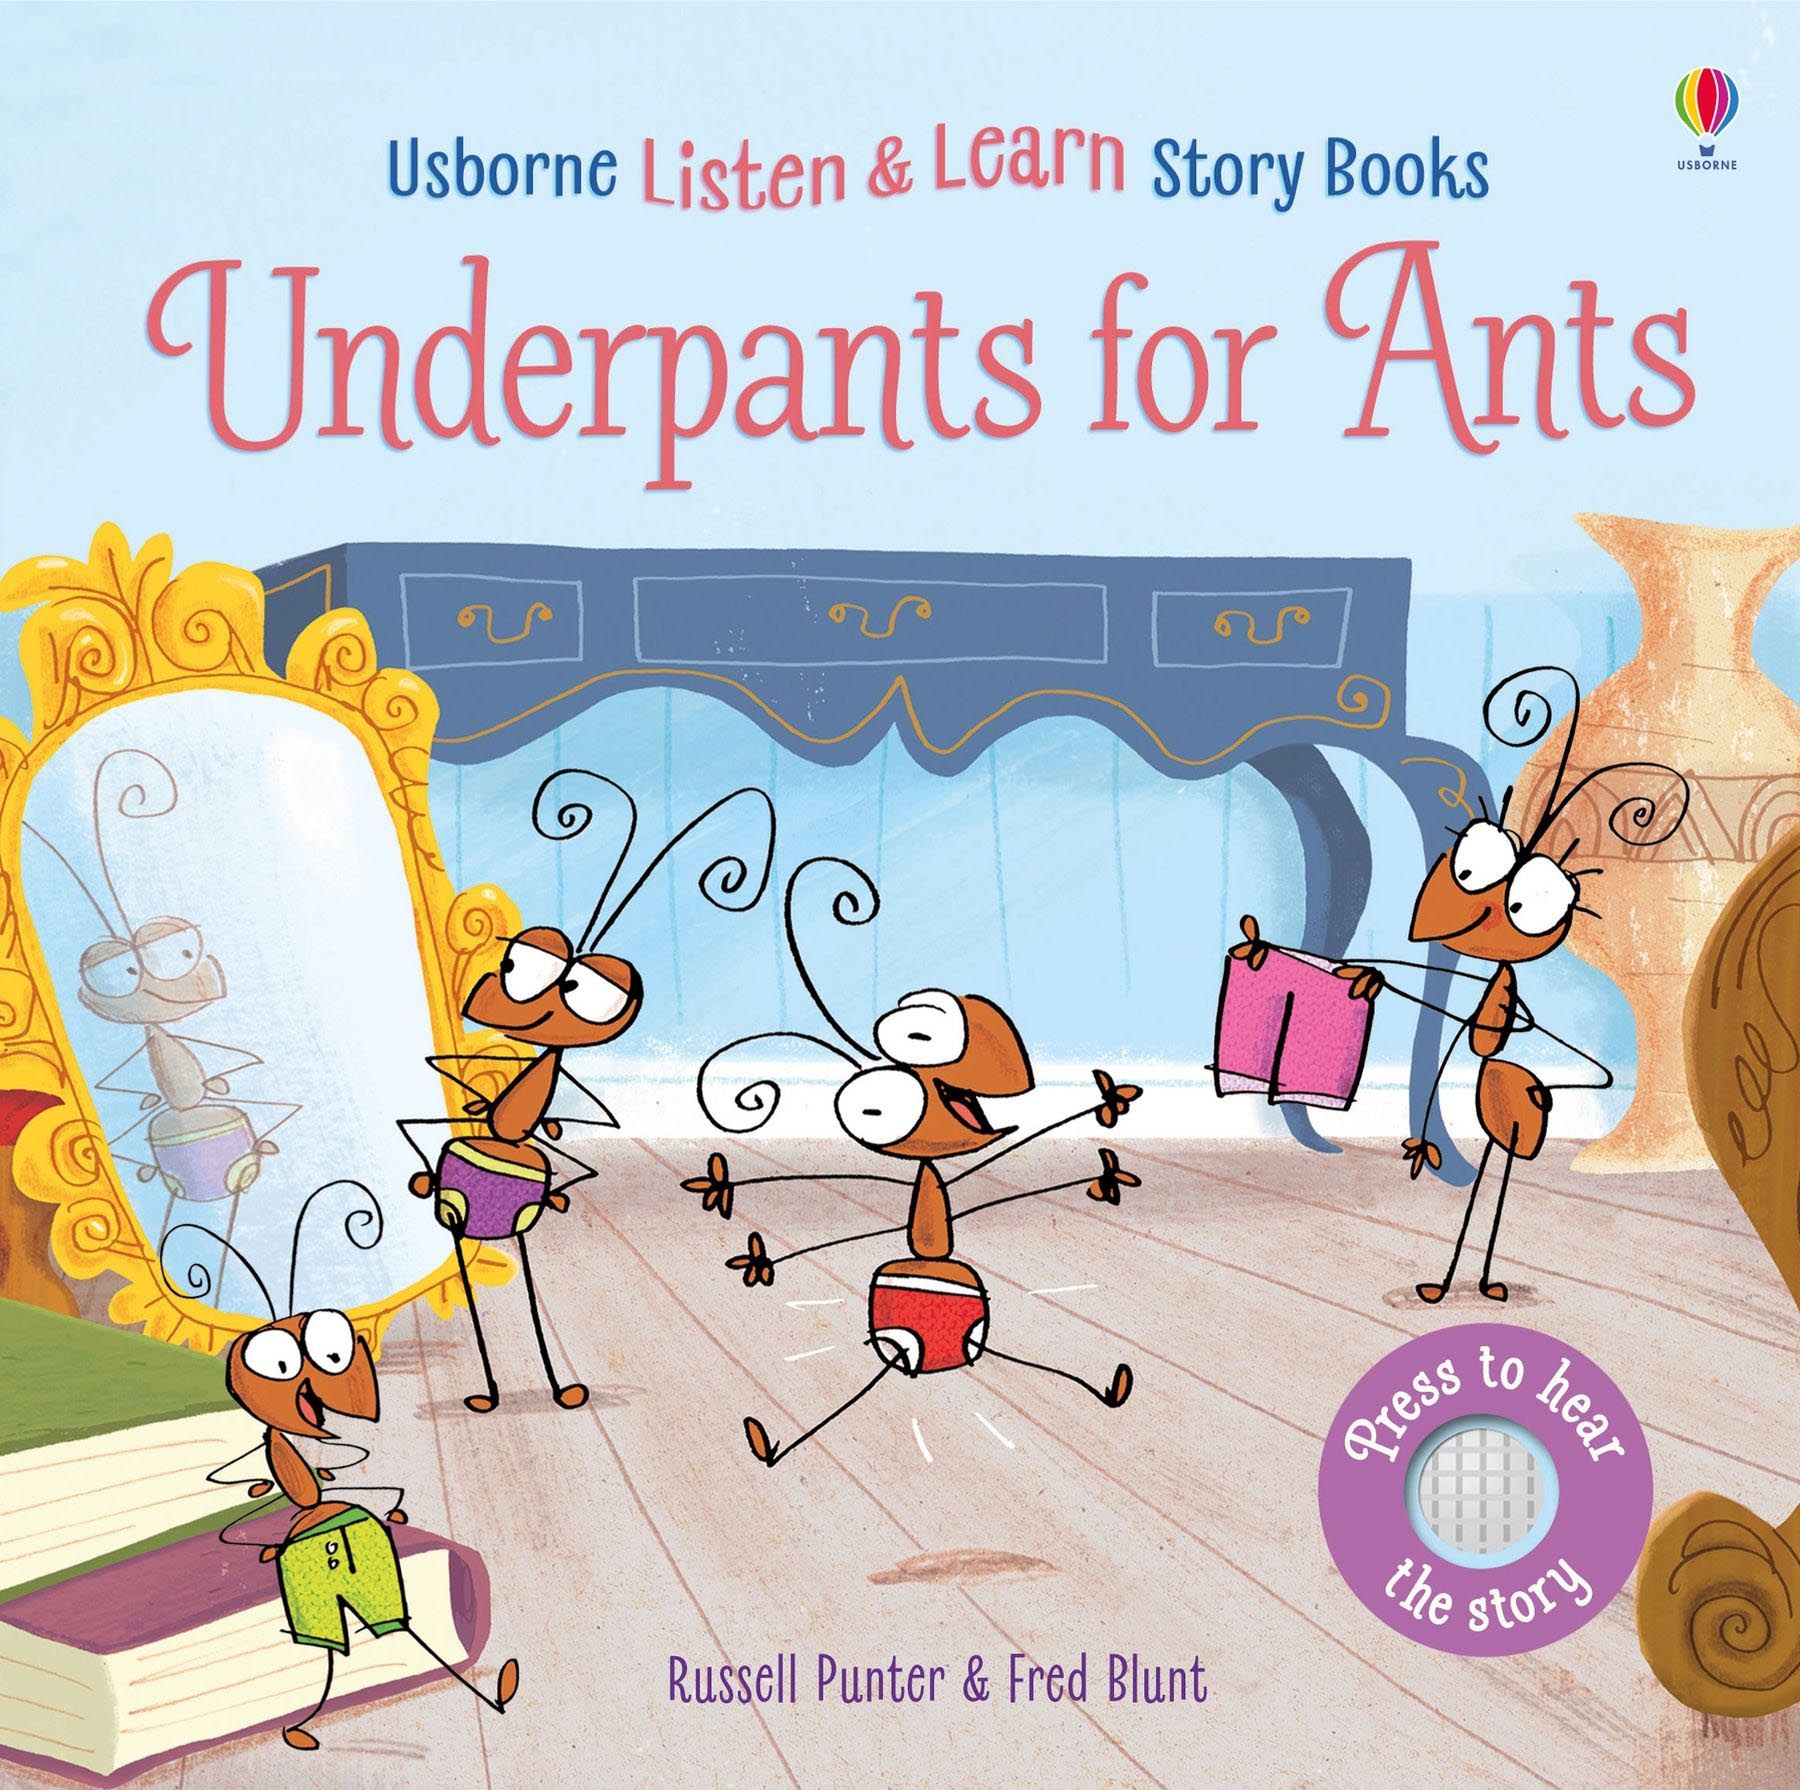 Usborne Listen & Learn Story Book Underpants for Ants